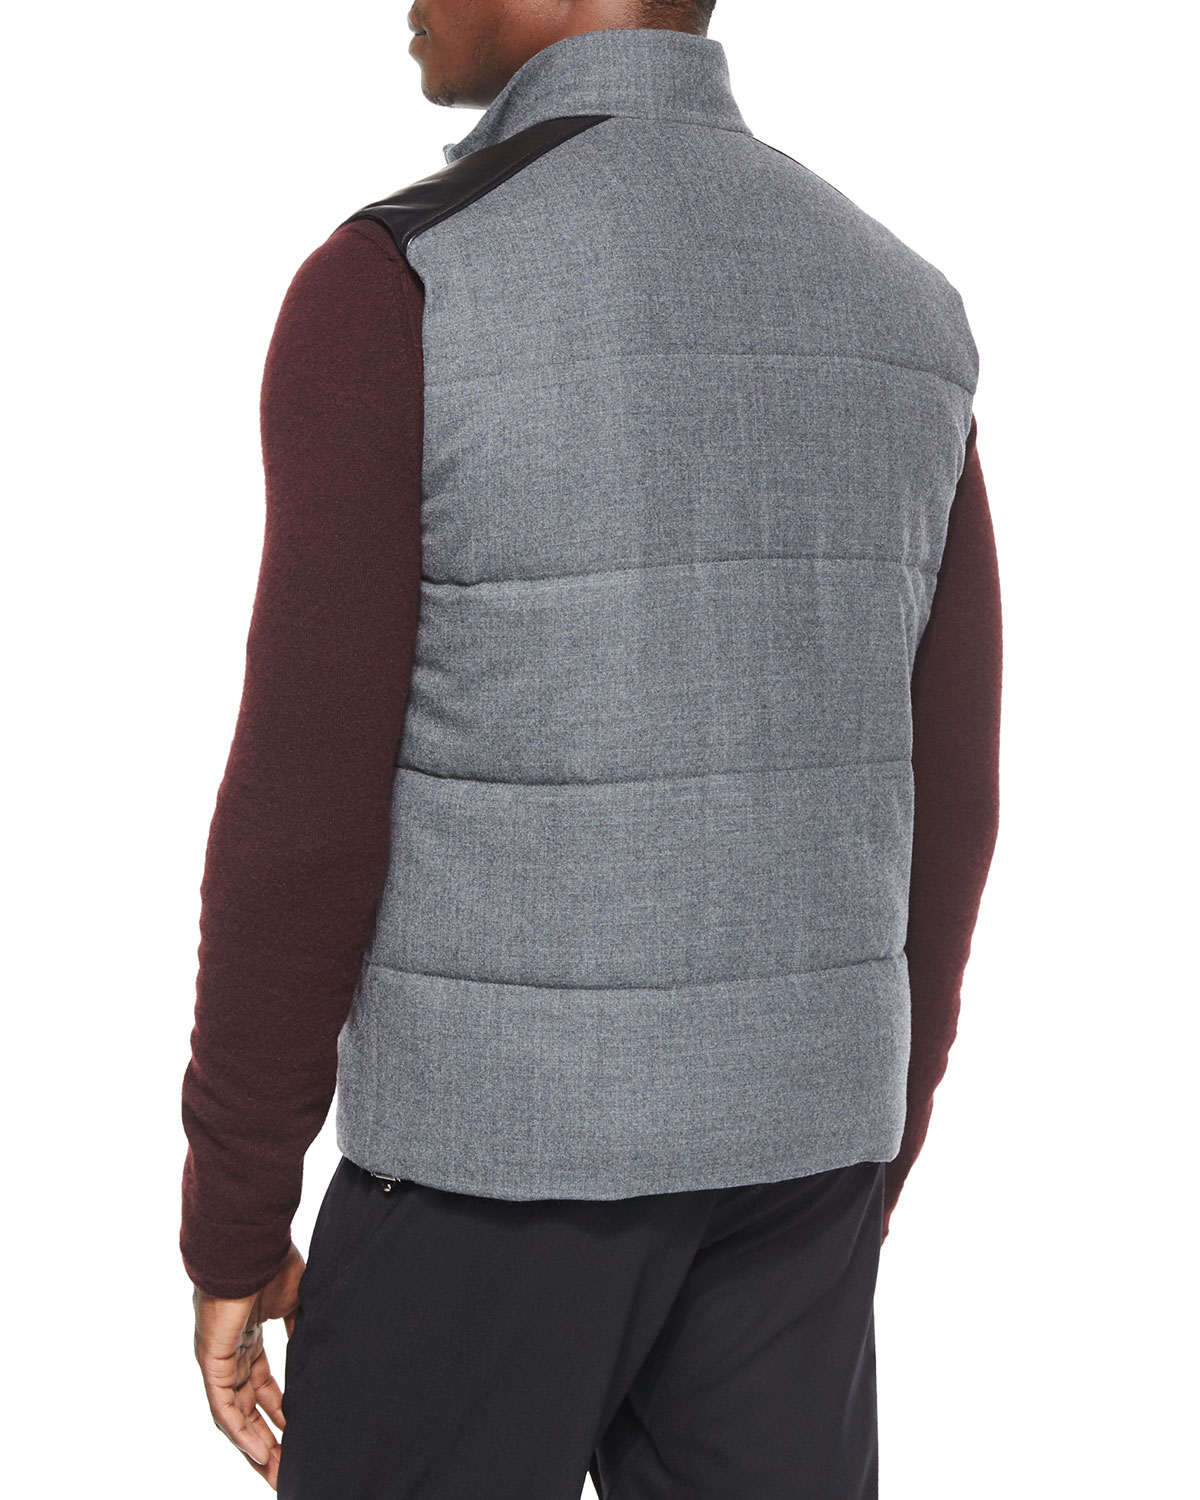 Vince Quilted Vest With Leather Detail in Gray for Men - Lyst